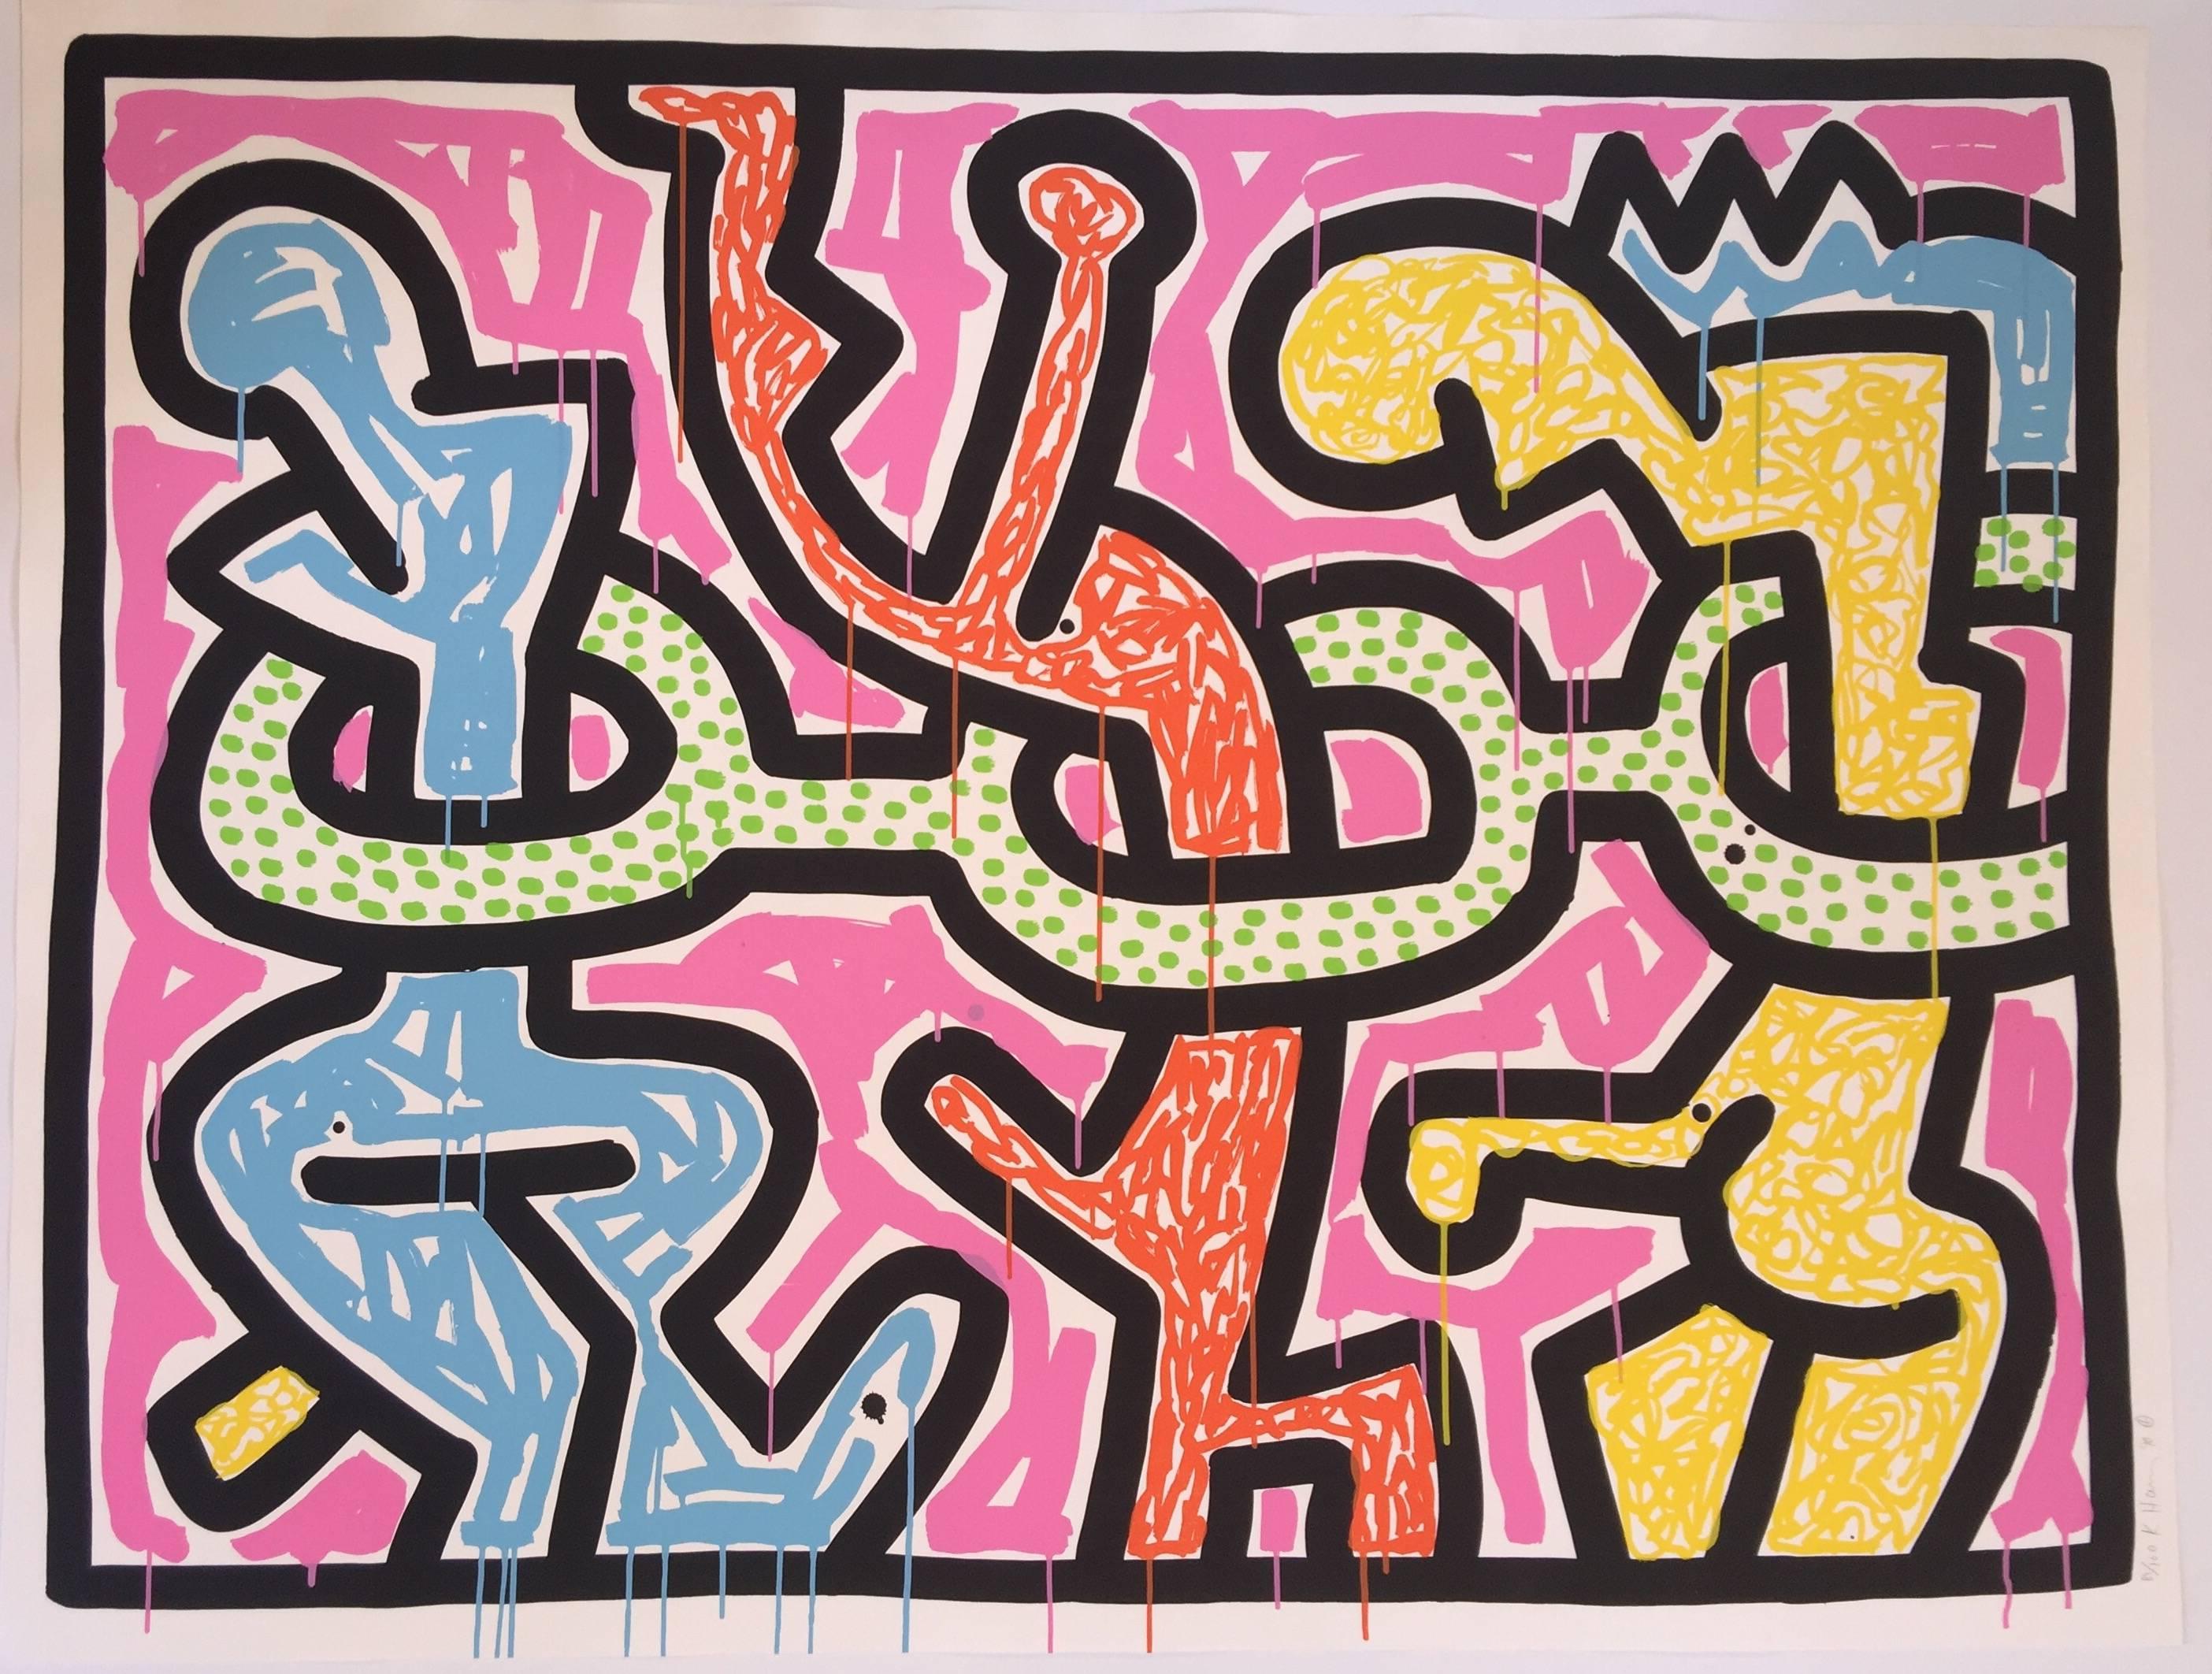 Flowers (2) - Print by Keith Haring